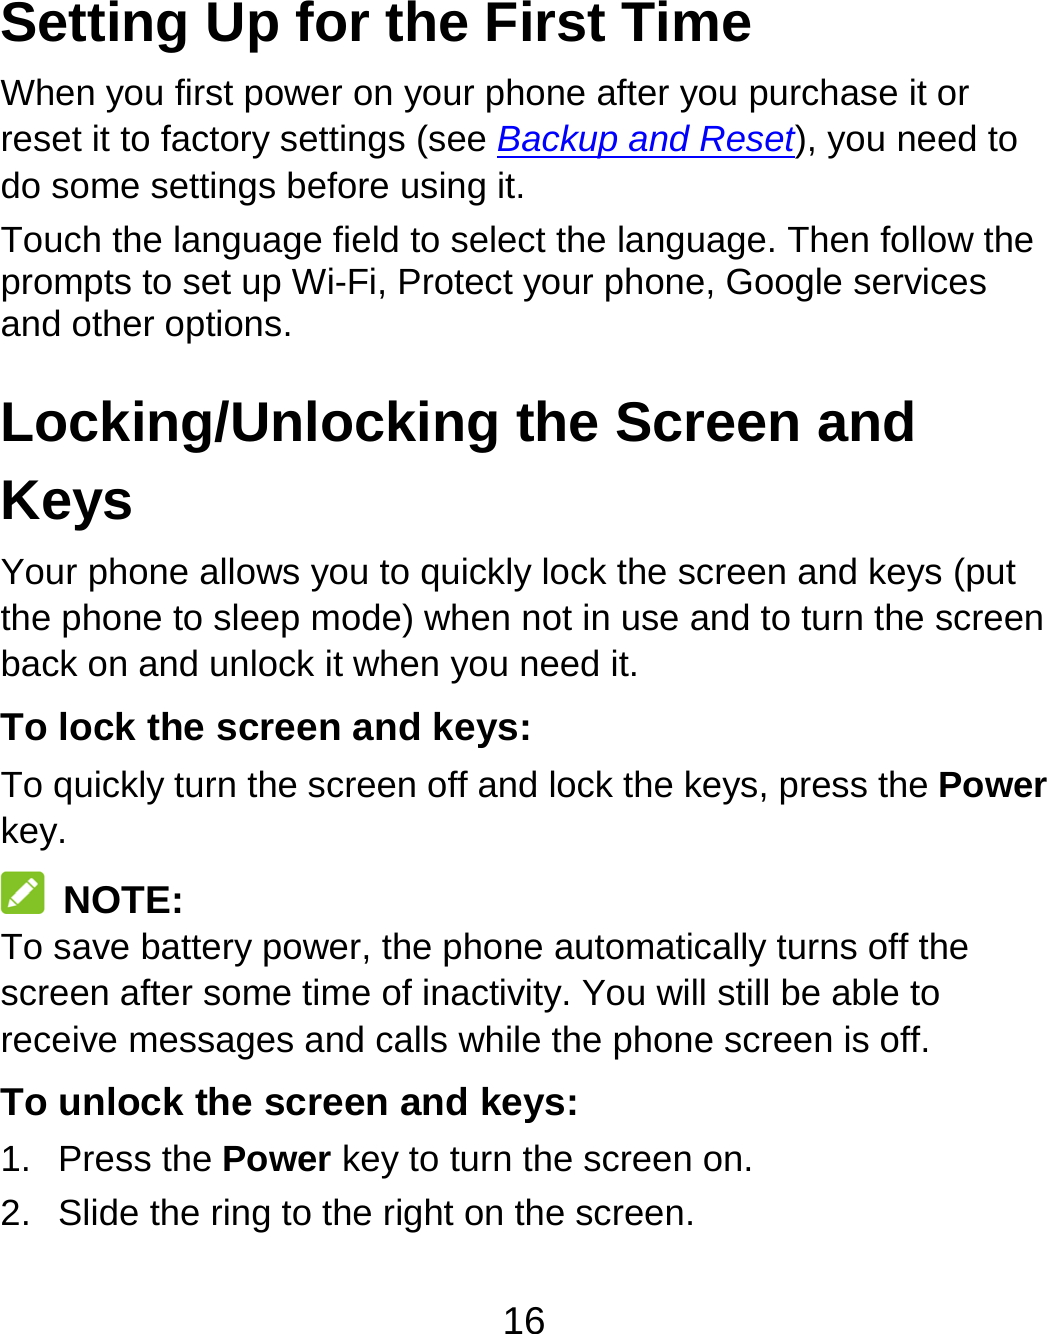 16 Setting Up for the First Time   When you first power on your phone after you purchase it or reset it to factory settings (see Backup and Reset), you need to do some settings before using it. Touch the language field to select the language. Then follow the prompts to set up Wi-Fi, Protect your phone, Google services and other options. Locking/Unlocking the Screen and Keys Your phone allows you to quickly lock the screen and keys (put the phone to sleep mode) when not in use and to turn the screen back on and unlock it when you need it. To lock the screen and keys: To quickly turn the screen off and lock the keys, press the Power key.  NOTE: To save battery power, the phone automatically turns off the screen after some time of inactivity. You will still be able to receive messages and calls while the phone screen is off. To unlock the screen and keys: 1. Press the Power key to turn the screen on. 2.  Slide the ring to the right on the screen. 